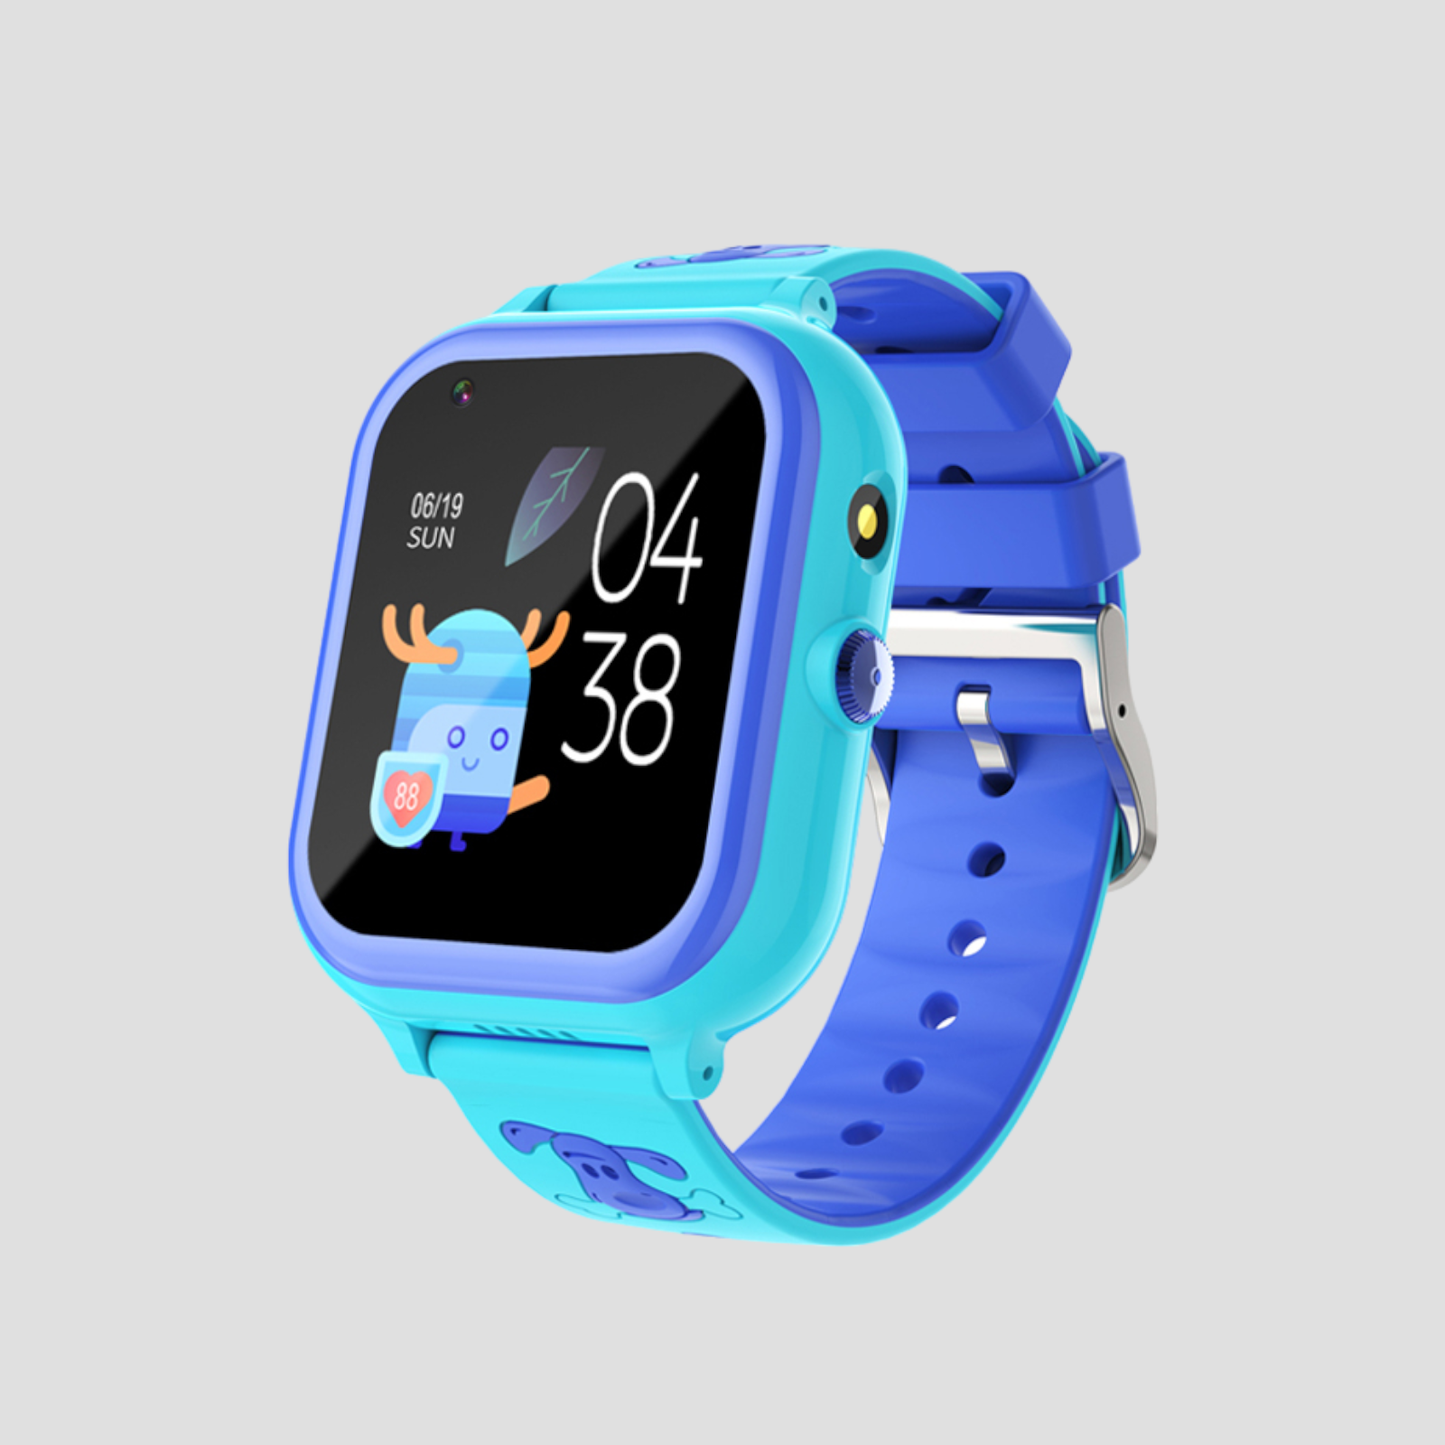 Shop blue bay watch for kid's in Nepal from brothermart